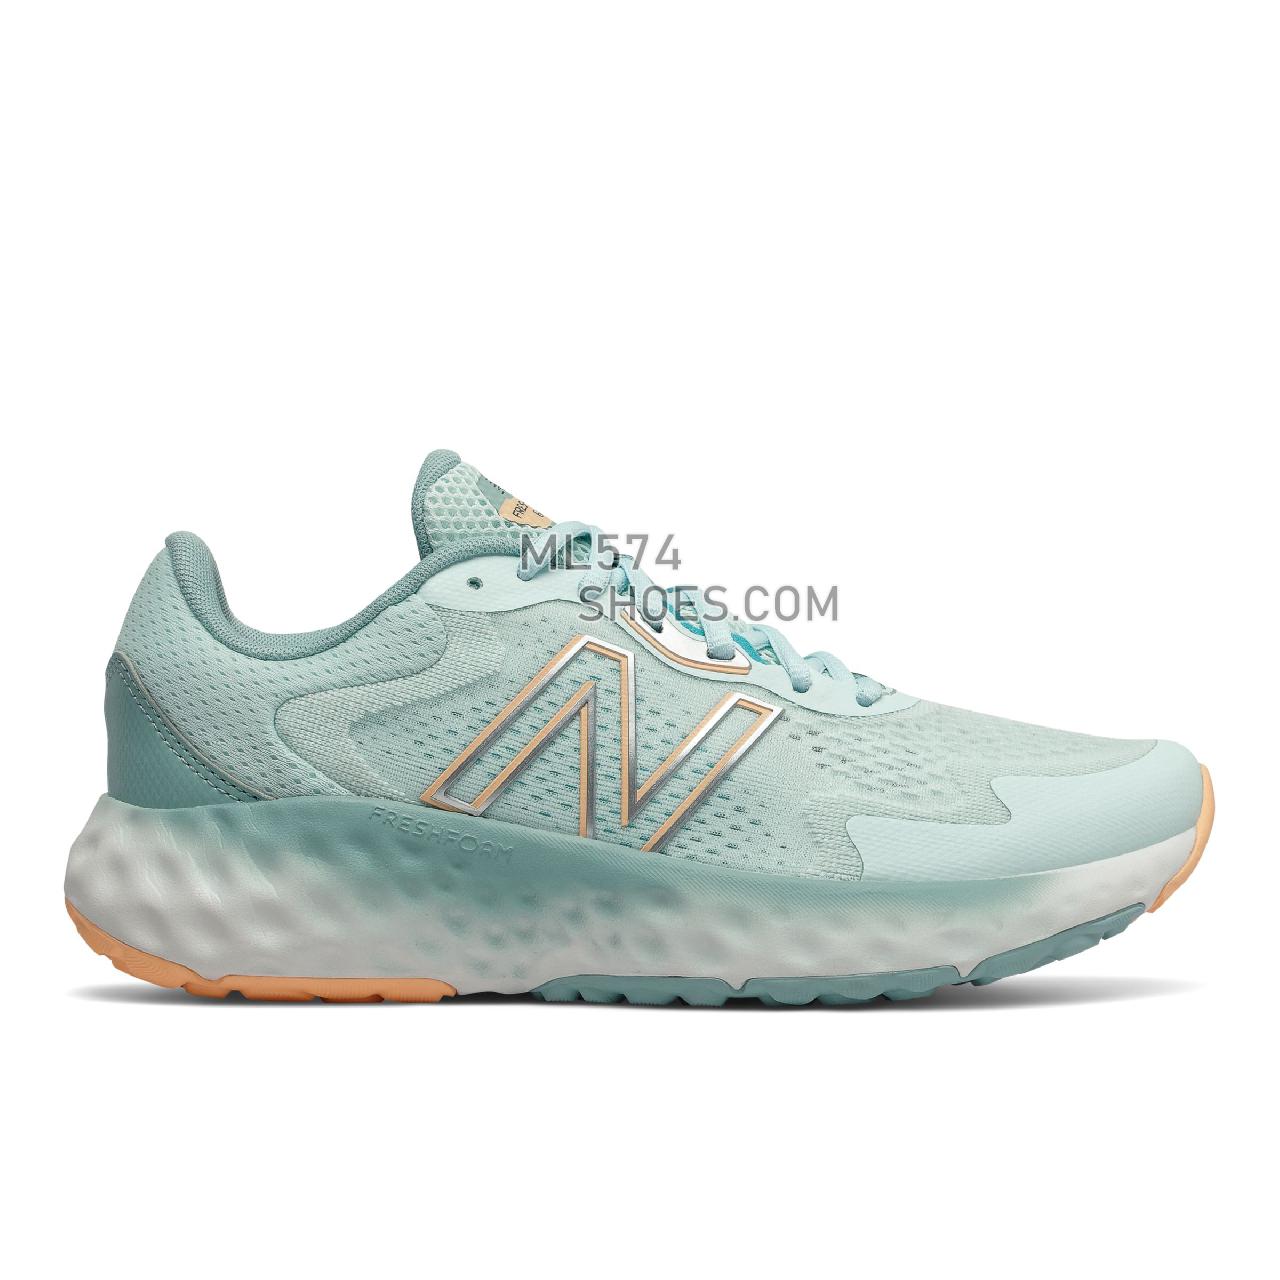 New Balance WEVOZV1 - Women's Classic Sneakers - White with Pale Blue Chill - WEVOZCM1